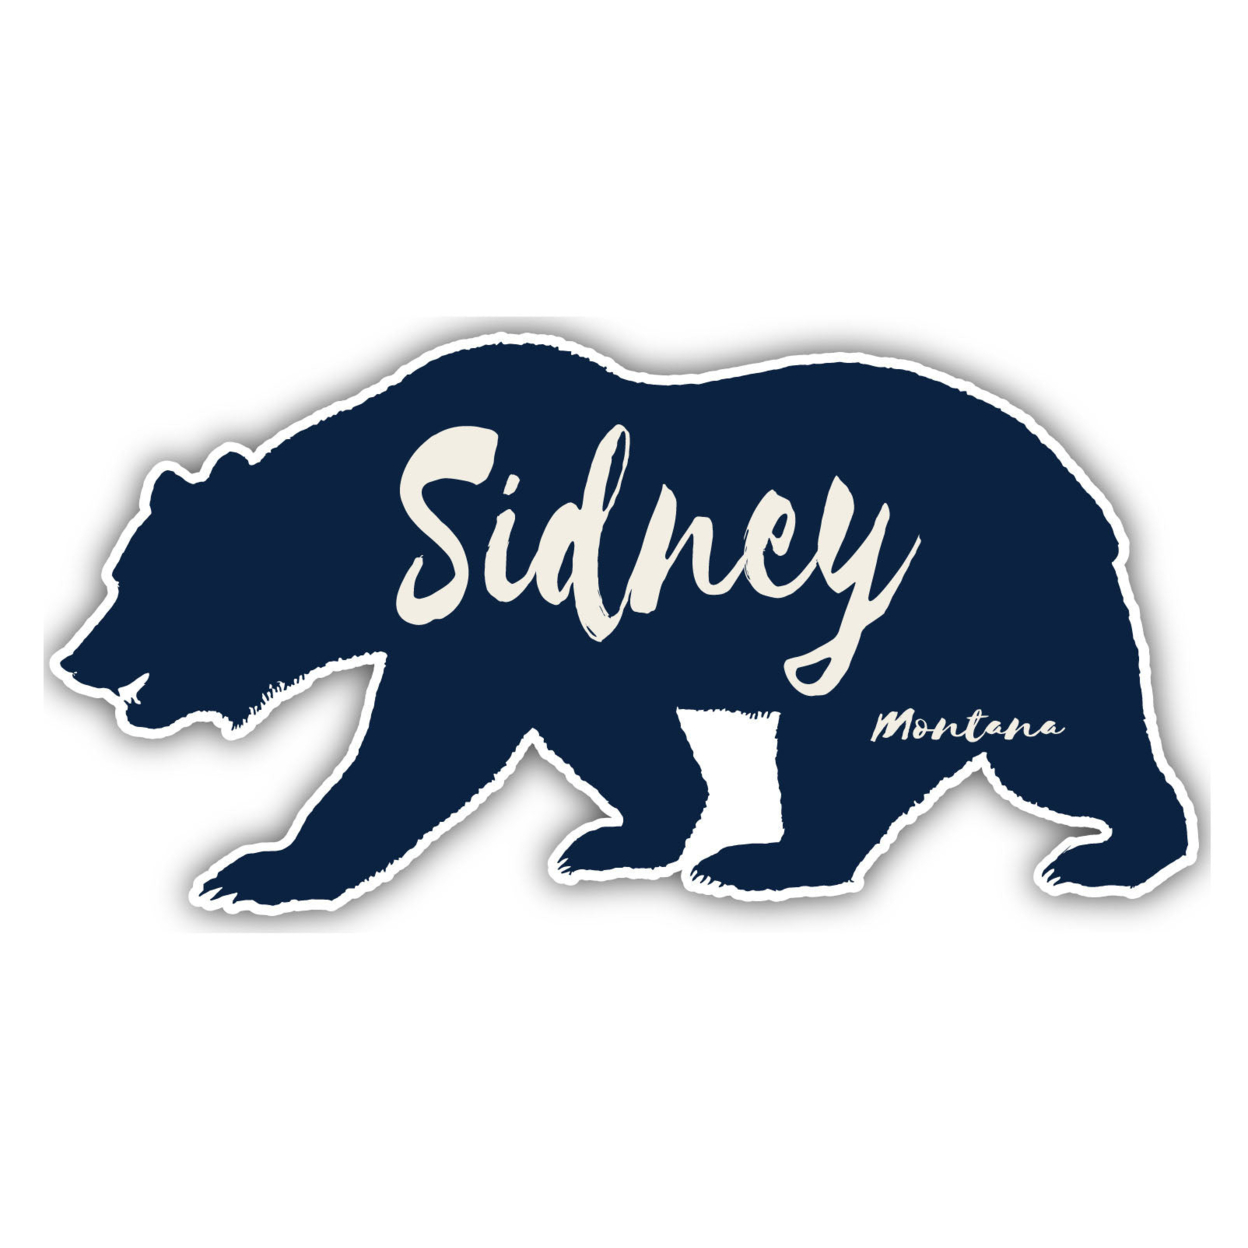 Sidney Montana Souvenir Decorative Stickers (Choose Theme And Size) - Single Unit, 2-Inch, Great Outdoors